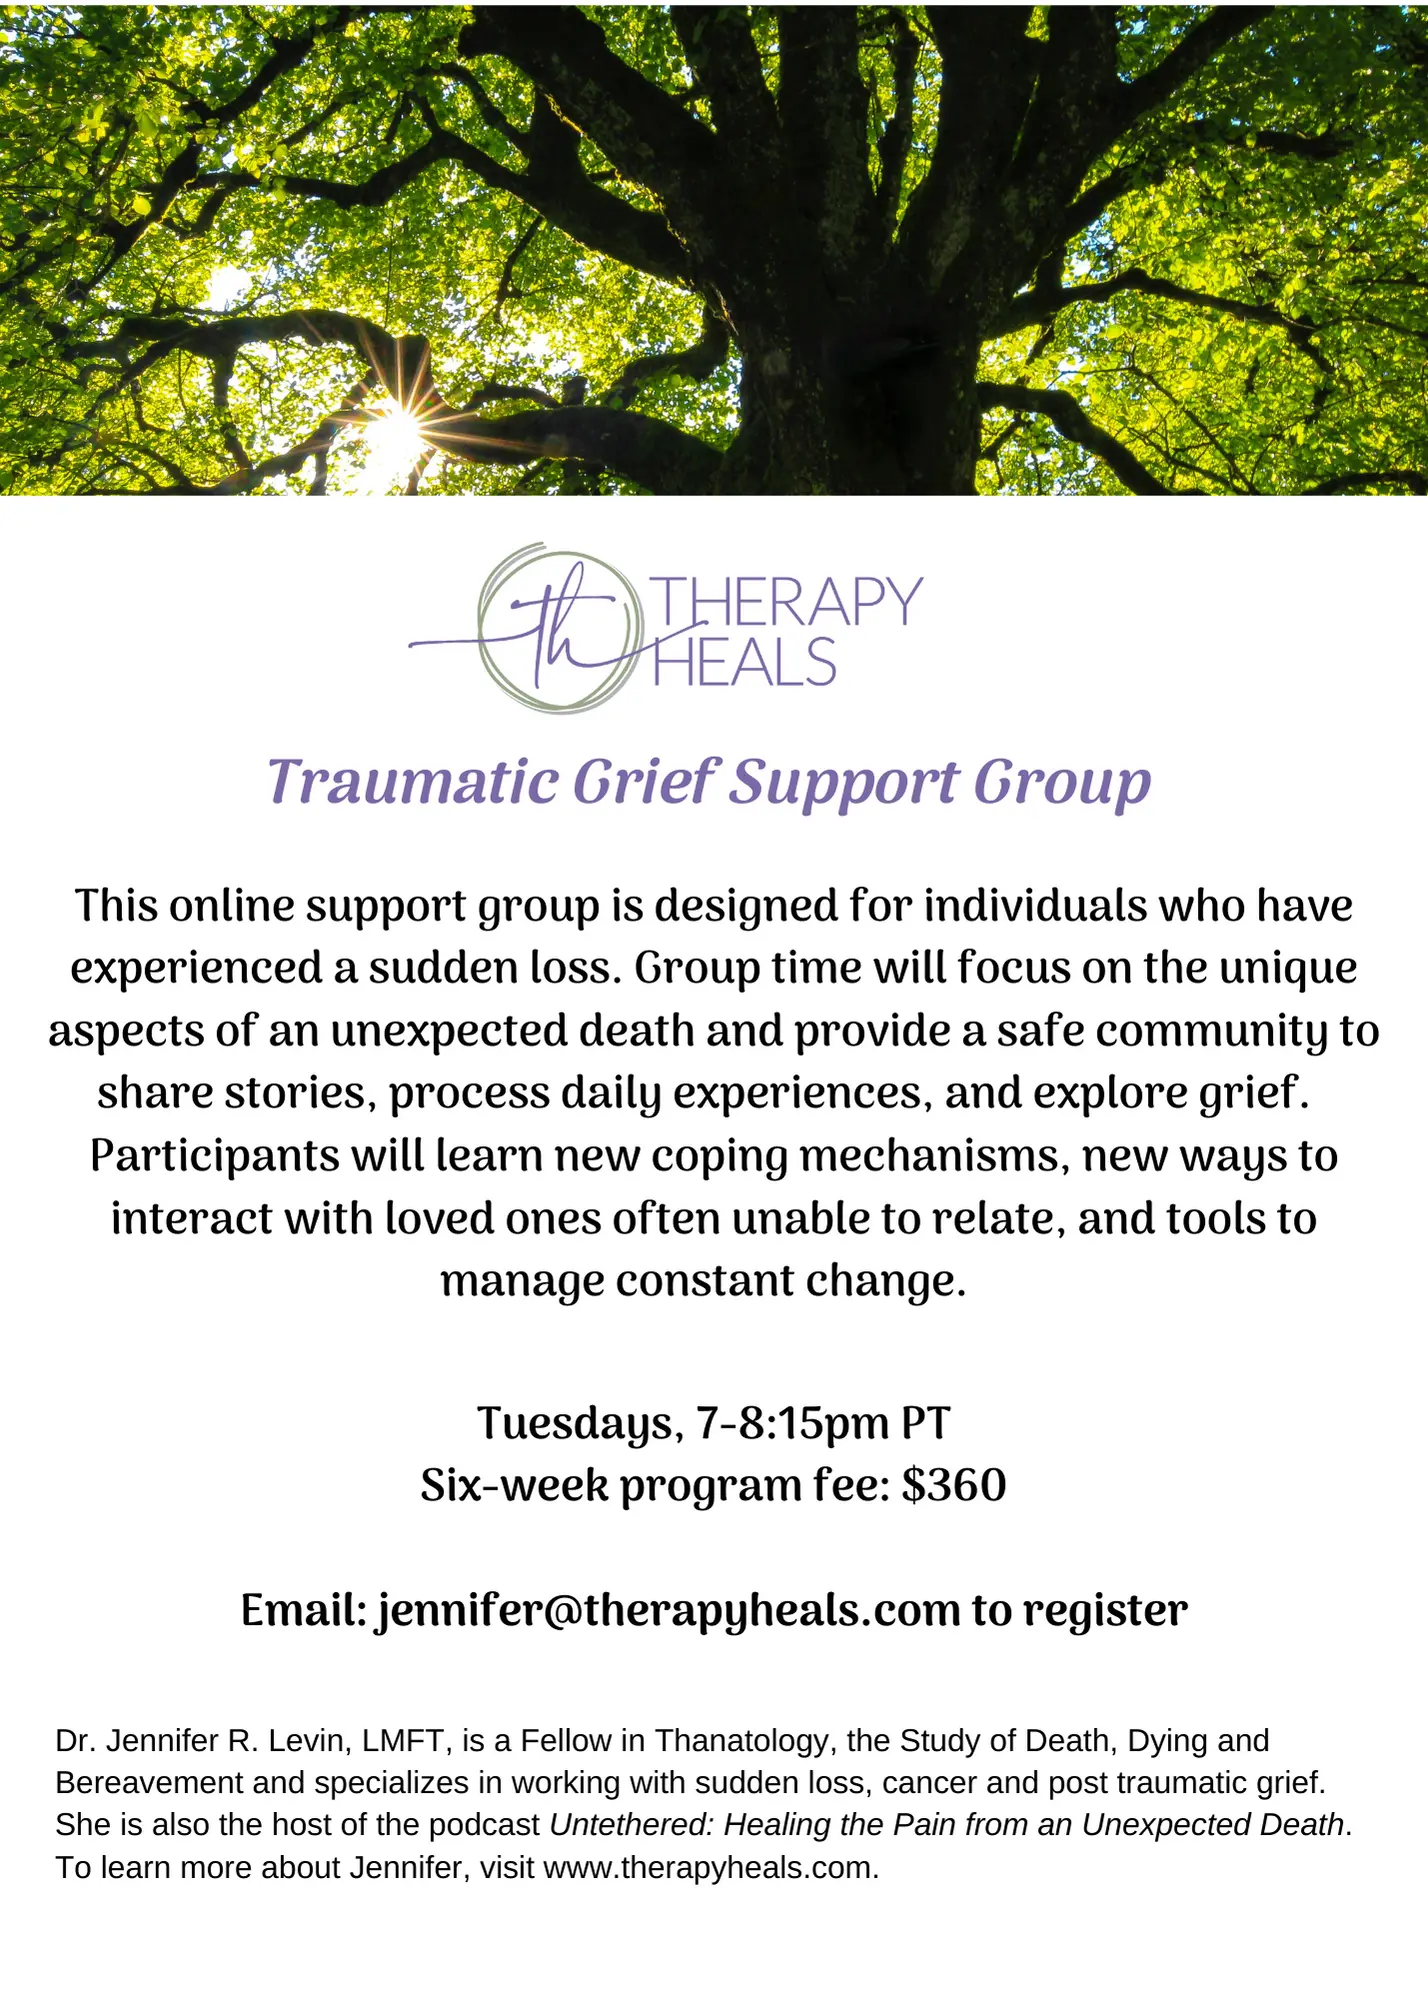 Traumatic Grief Support Group This online support group is designed for individuals who have experienced a sudden loss. Group time will focus on the unique aspects of an unexpected death and provide a safe community to share stories, process daily experiences, and explore grief. Participants will learn new coping mechanisms, new ways to interact with loved ones often unable to relate, and tools to manage constant change. Tuesdays, 7-8:15pm PT Six-week program fee: $360 Email: jennifer@therapyheals.com to register Dr. Jennifer R. Levin, LMFT, is a Fellow in Thanatology, the Study of Death, Dying and Bereavement and specializes in working with sudden loss, cancer and post traumatic grief. She is also the host of the podcast Untethered: Healing the Pain from an Unexpected Death. To learn more about Jennifer, visit www.therapyheals.com.